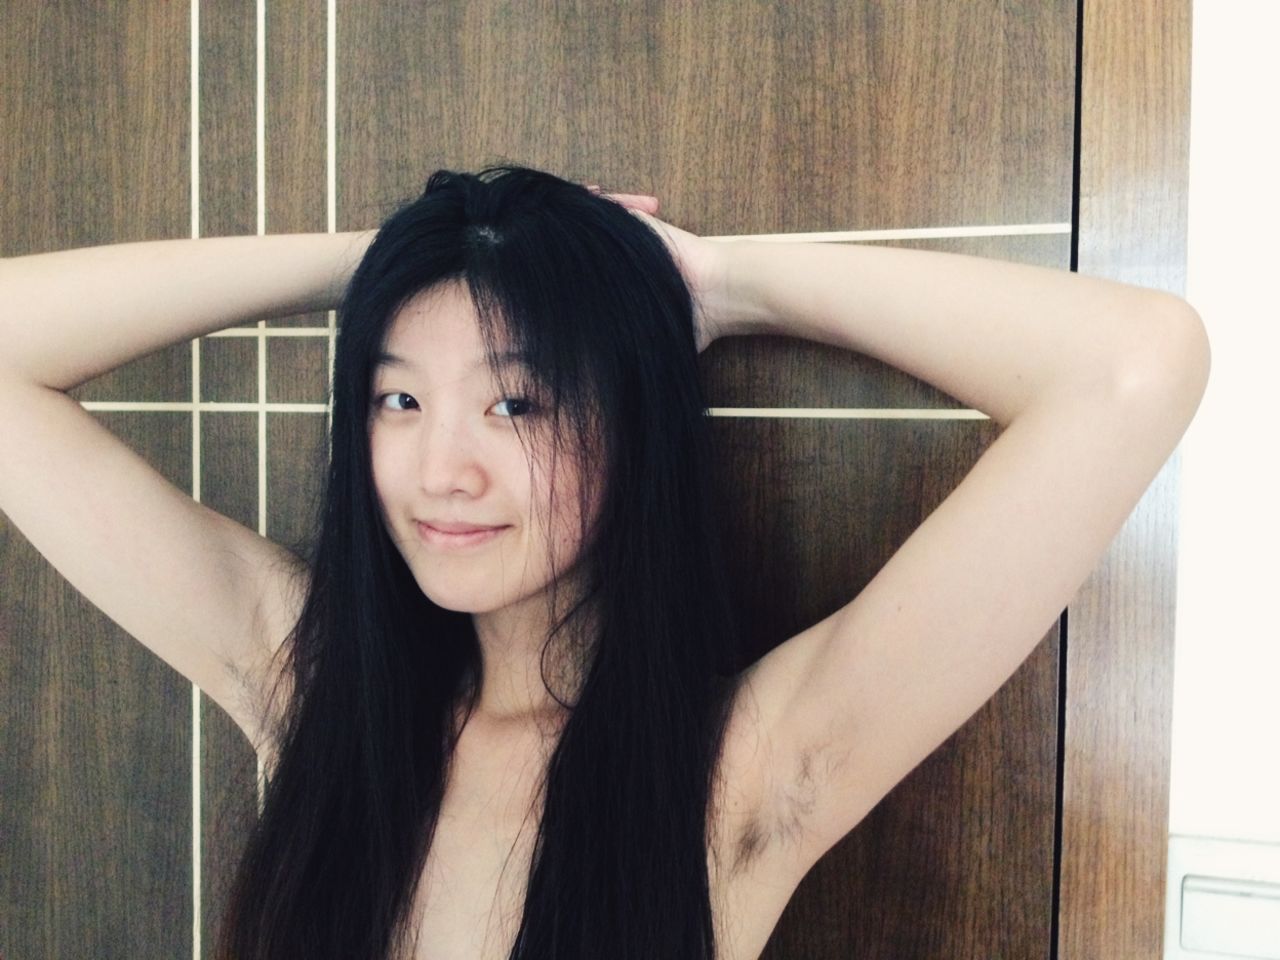 Sleep Chinese Girl Series Sex Videos - Chinese feminists show off armpit hair in photo contest | CNN